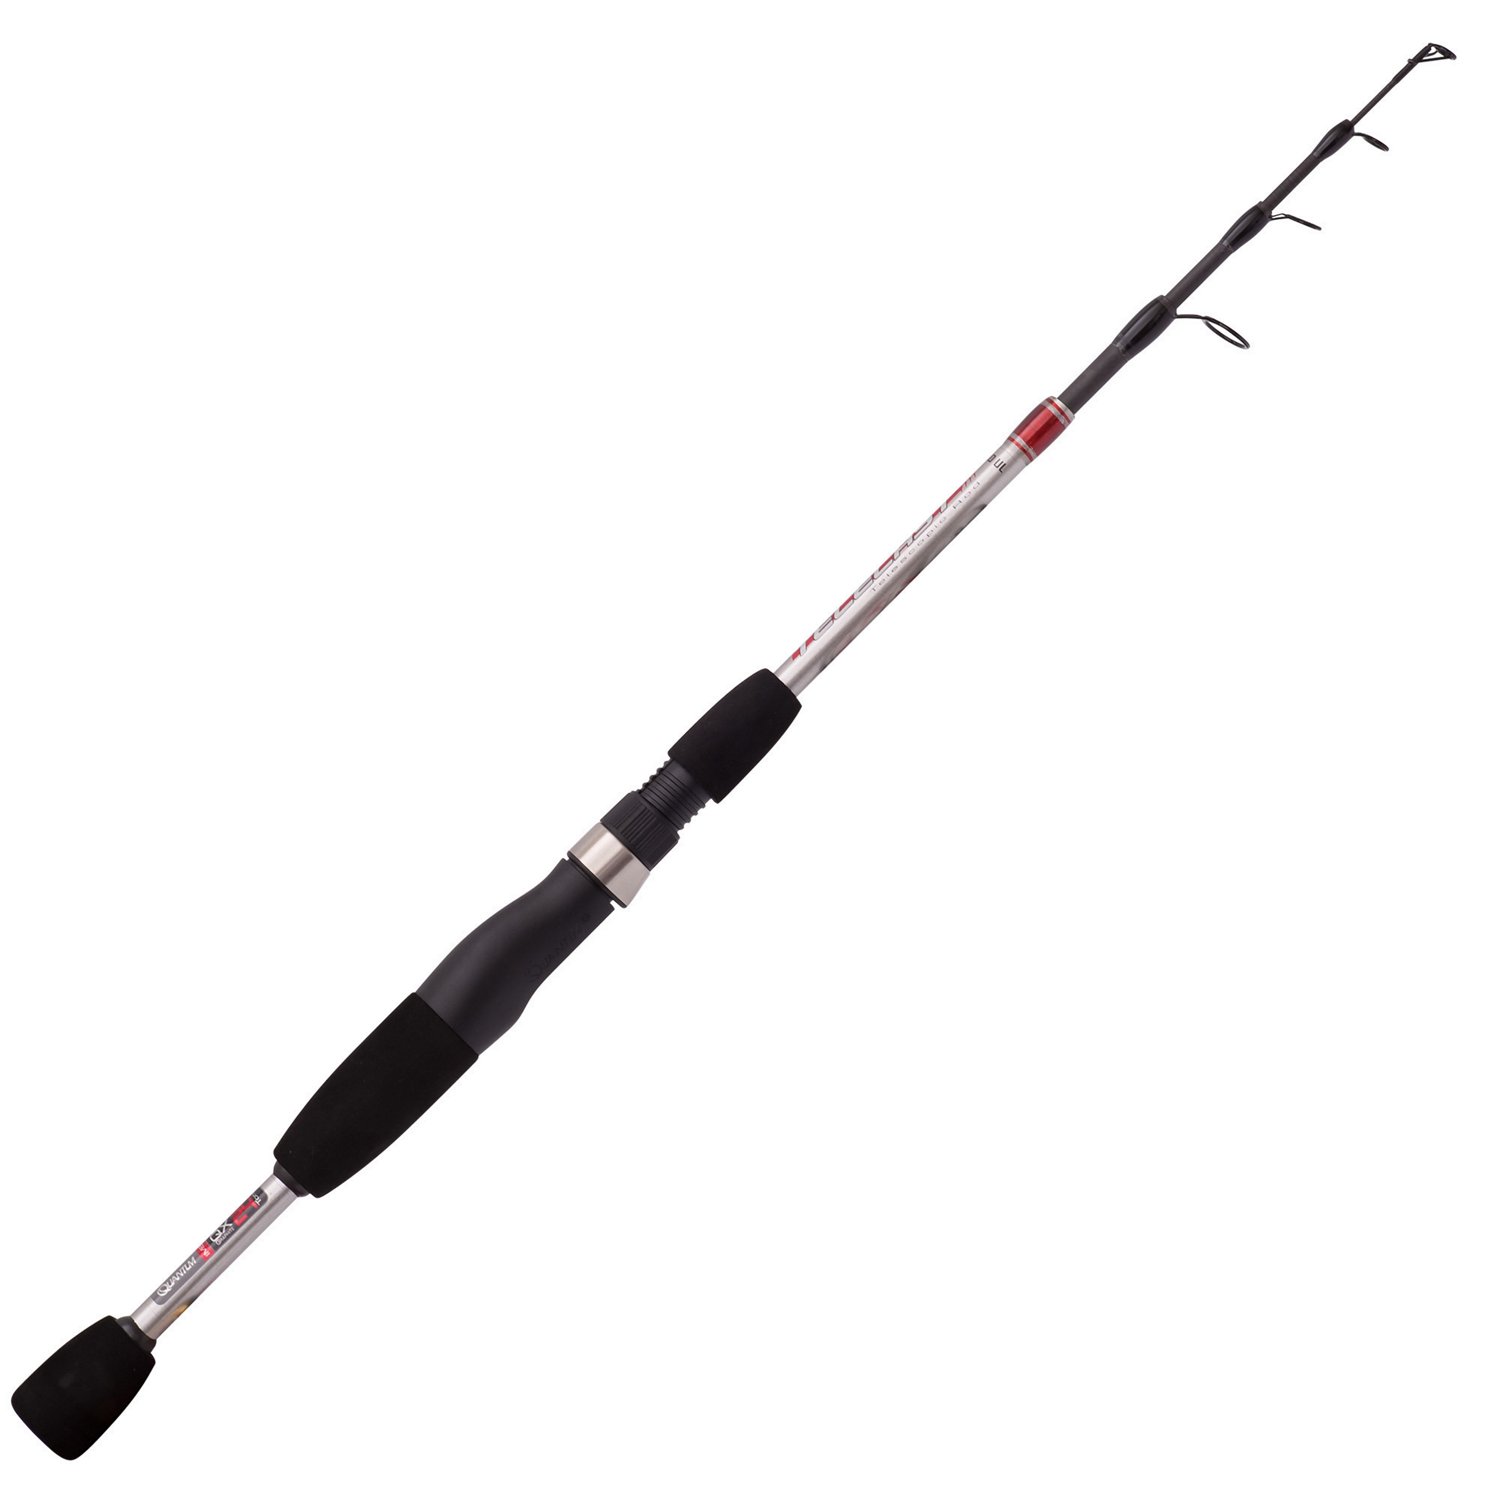 Master RD Spincast Rod 7ft MH 1pc RGP-23 